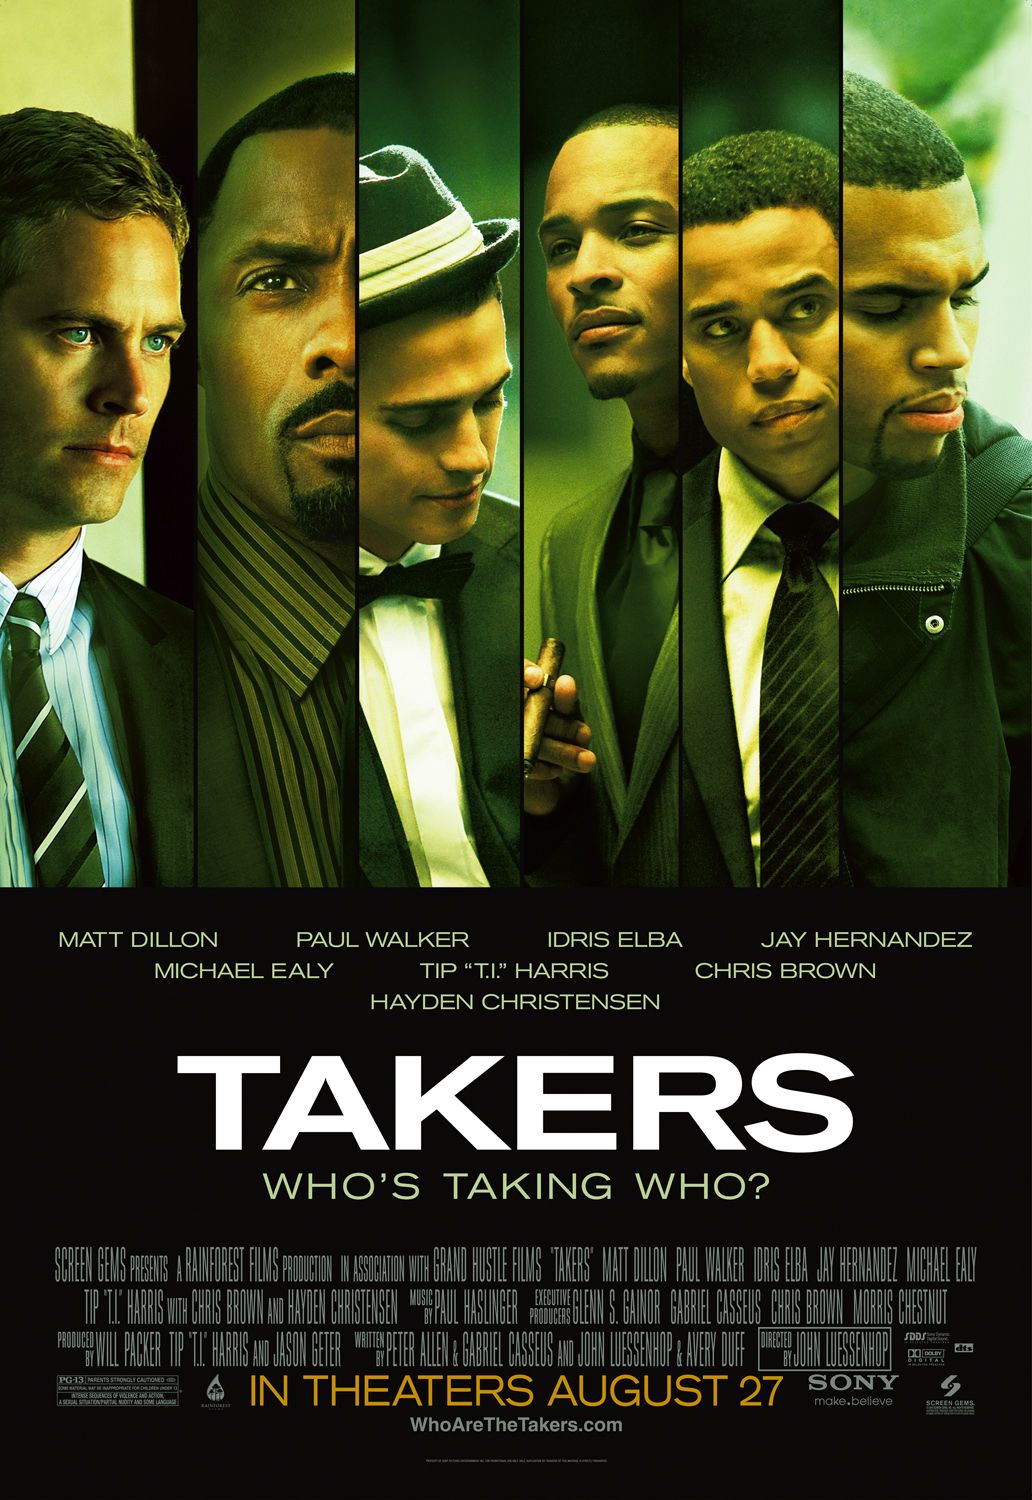 з˰ Takers.2010.1080p.BluRay.x264.DTS-FGT 7.94GB-1.png